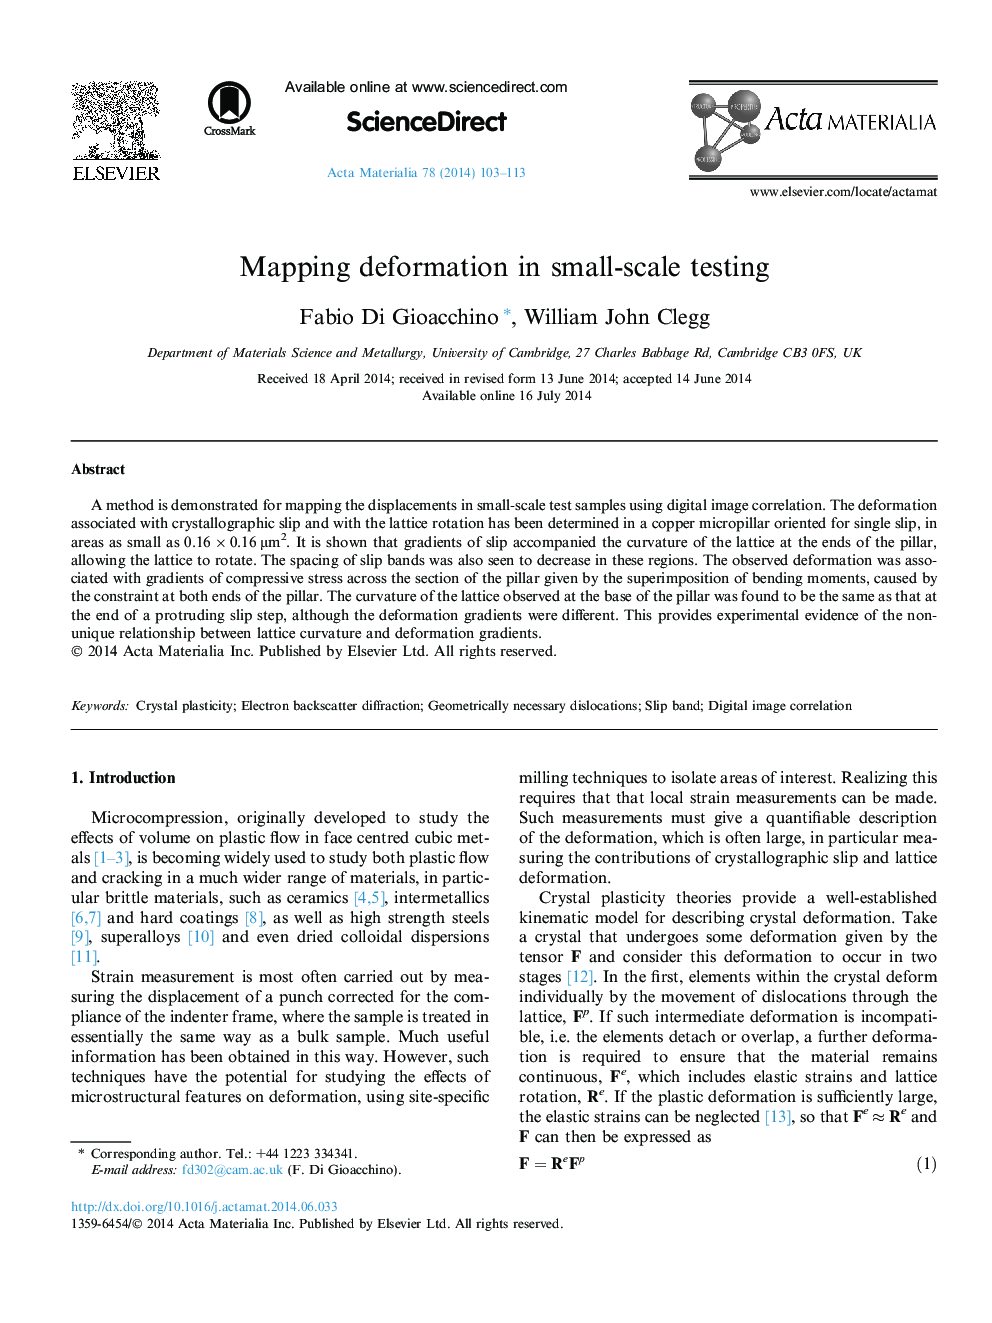 Mapping deformation in small-scale testing